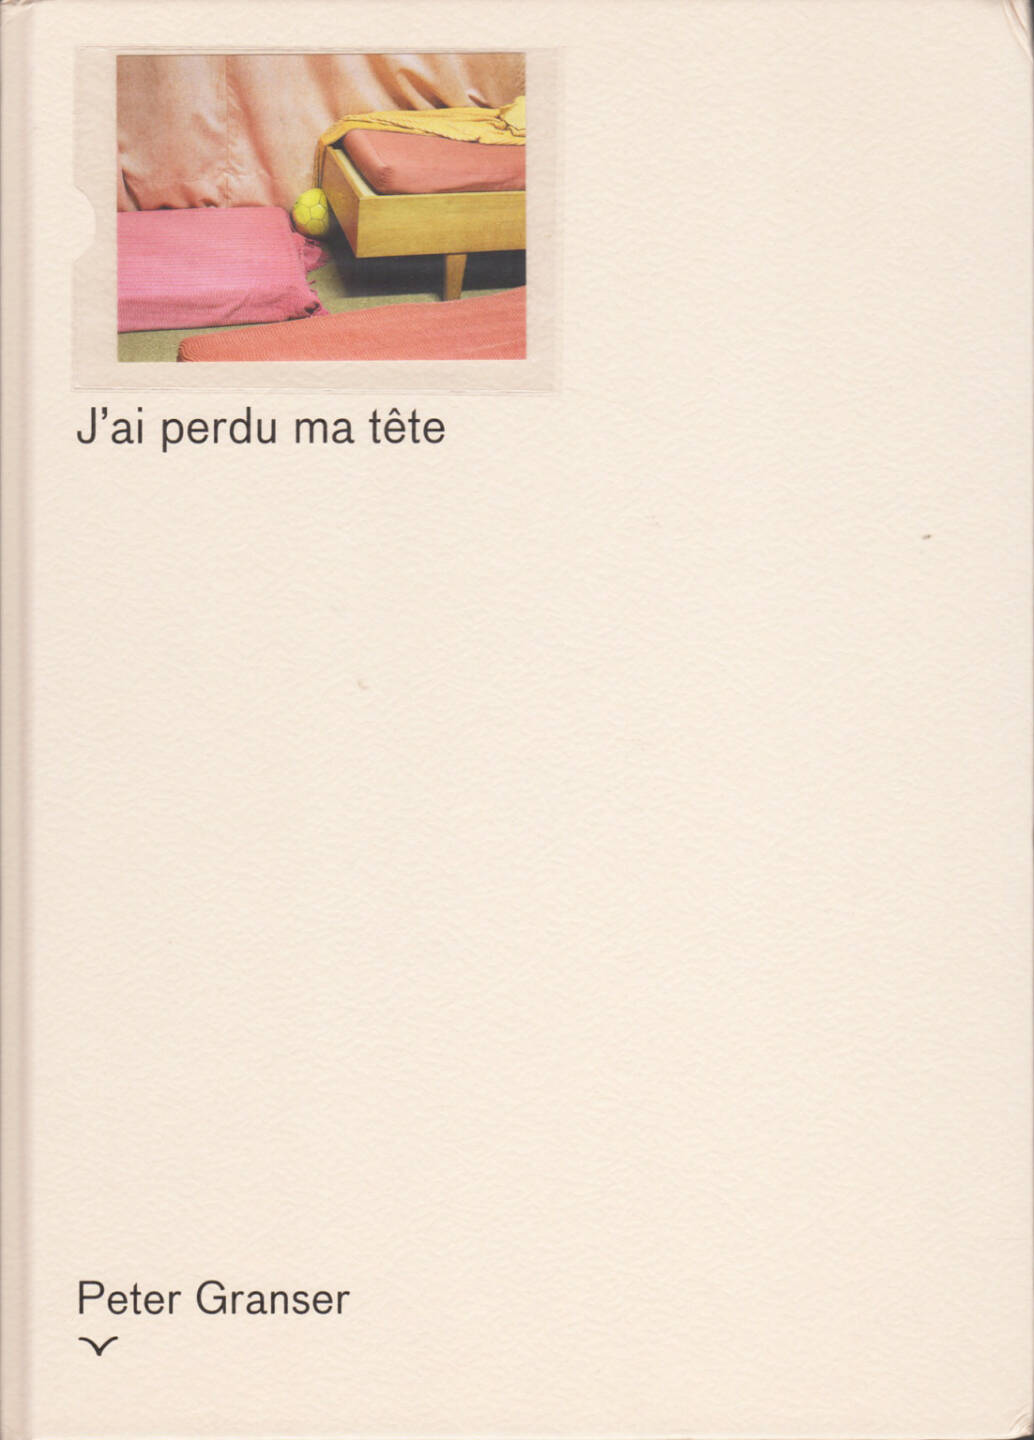 Peter Granser - J ́ai perdu ma tête, Edition Taube / Marraine Ginette Éditions 2014, Cover - http://josefchladek.com/book/peter_granser_-_j_́ai_perdu_ma_tete